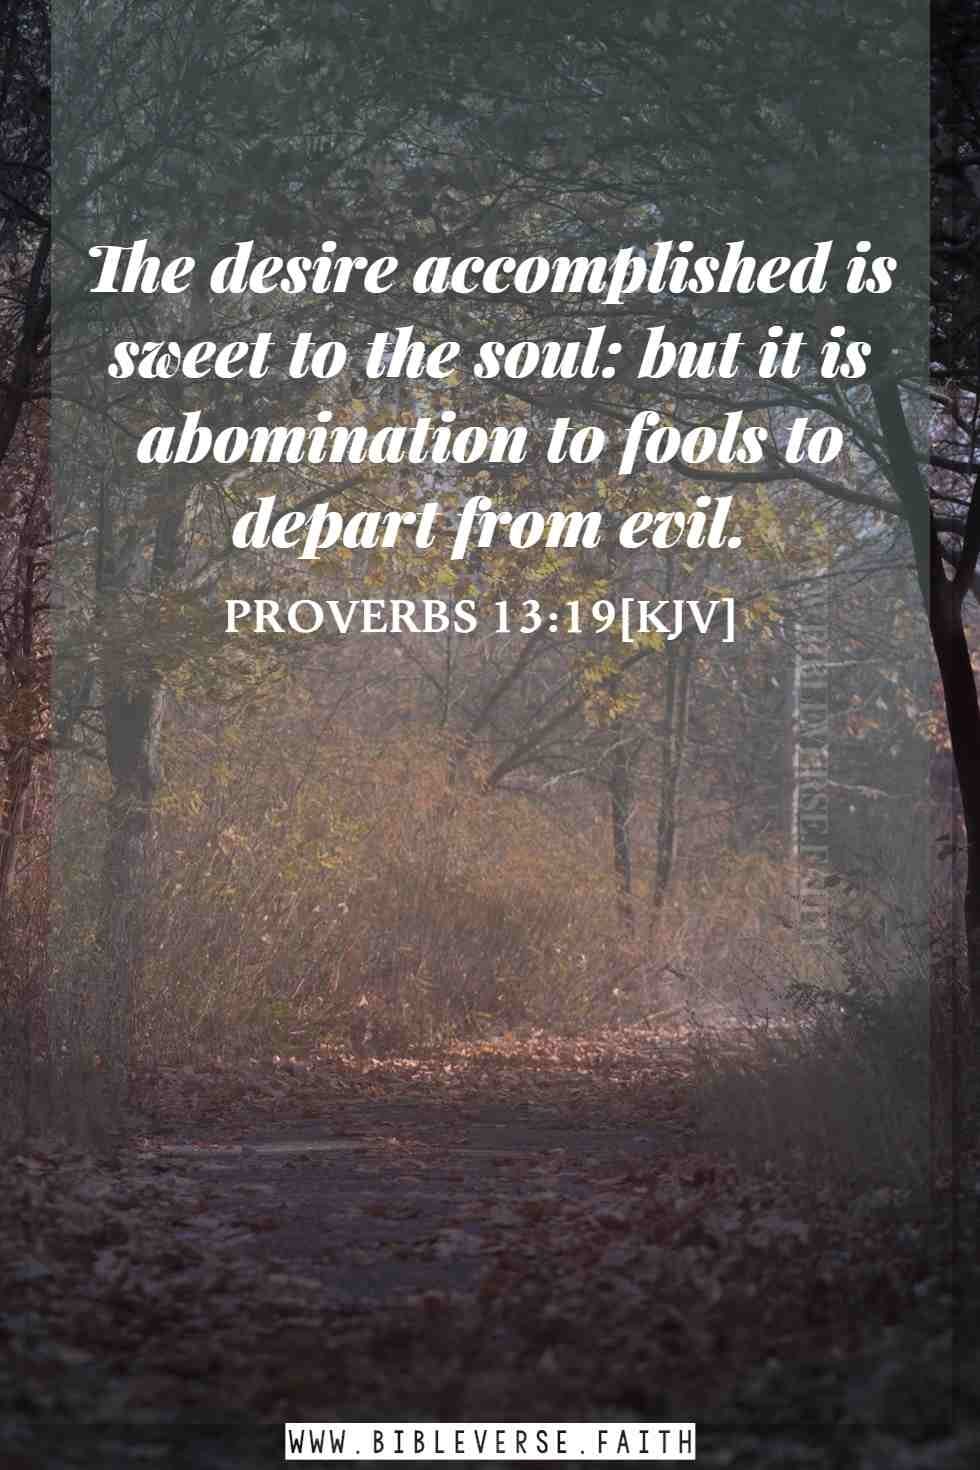 proverbs 13 19[kjv] abomination in the bible